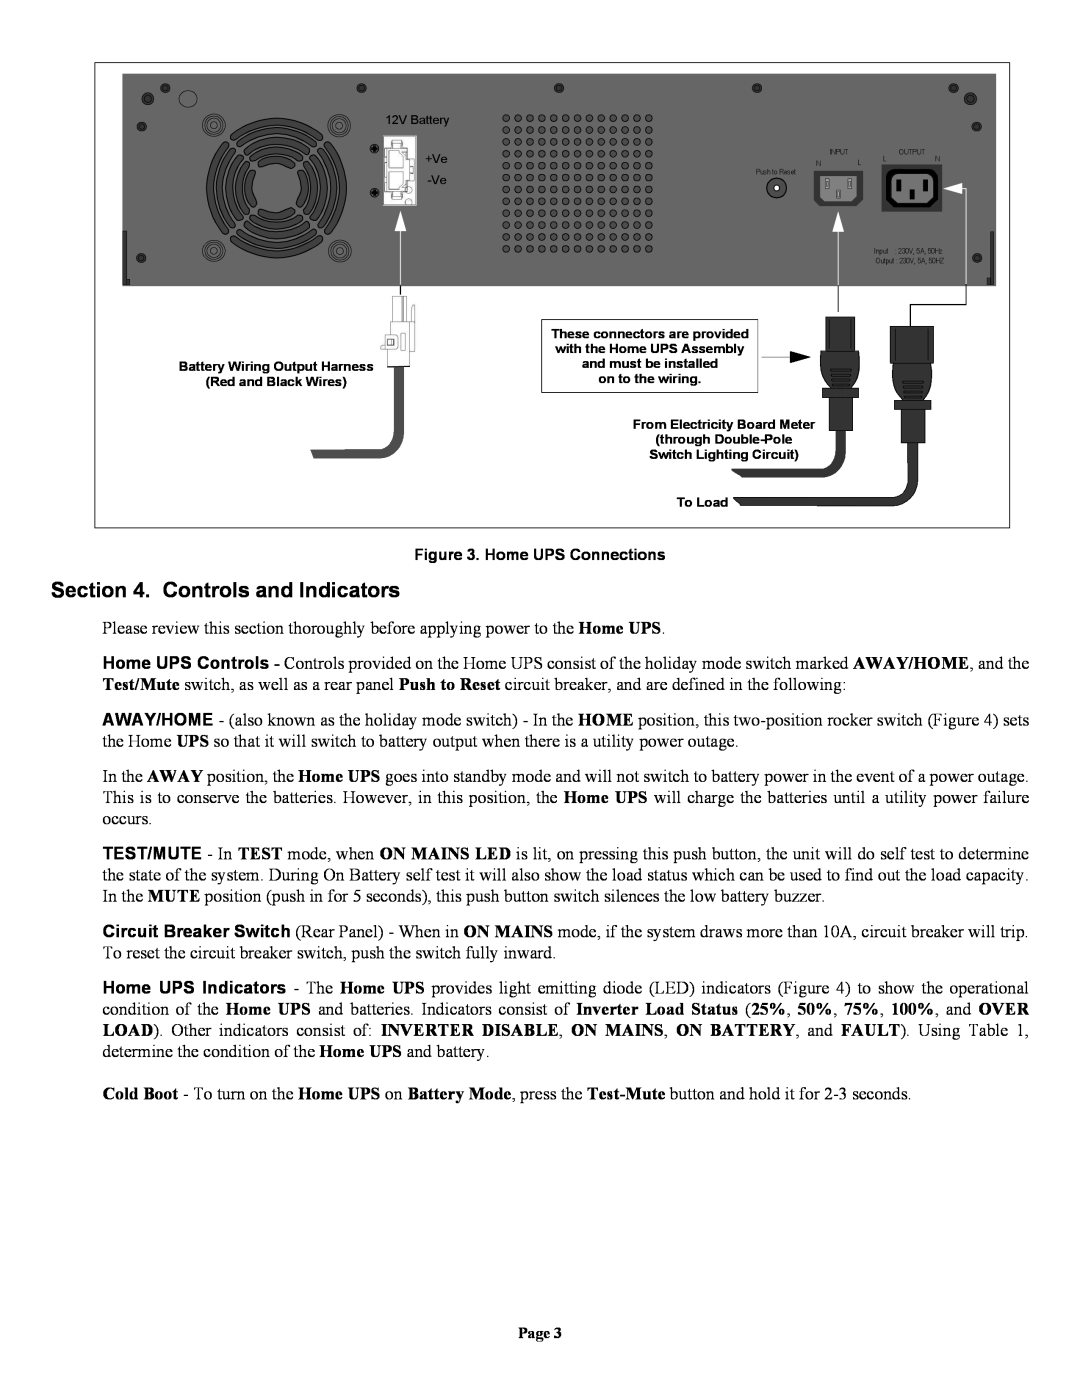 American Power Conversion HI600SQ Controls and Indicators, Battery Wiring Output Harness, through Double-Pole, To Load 